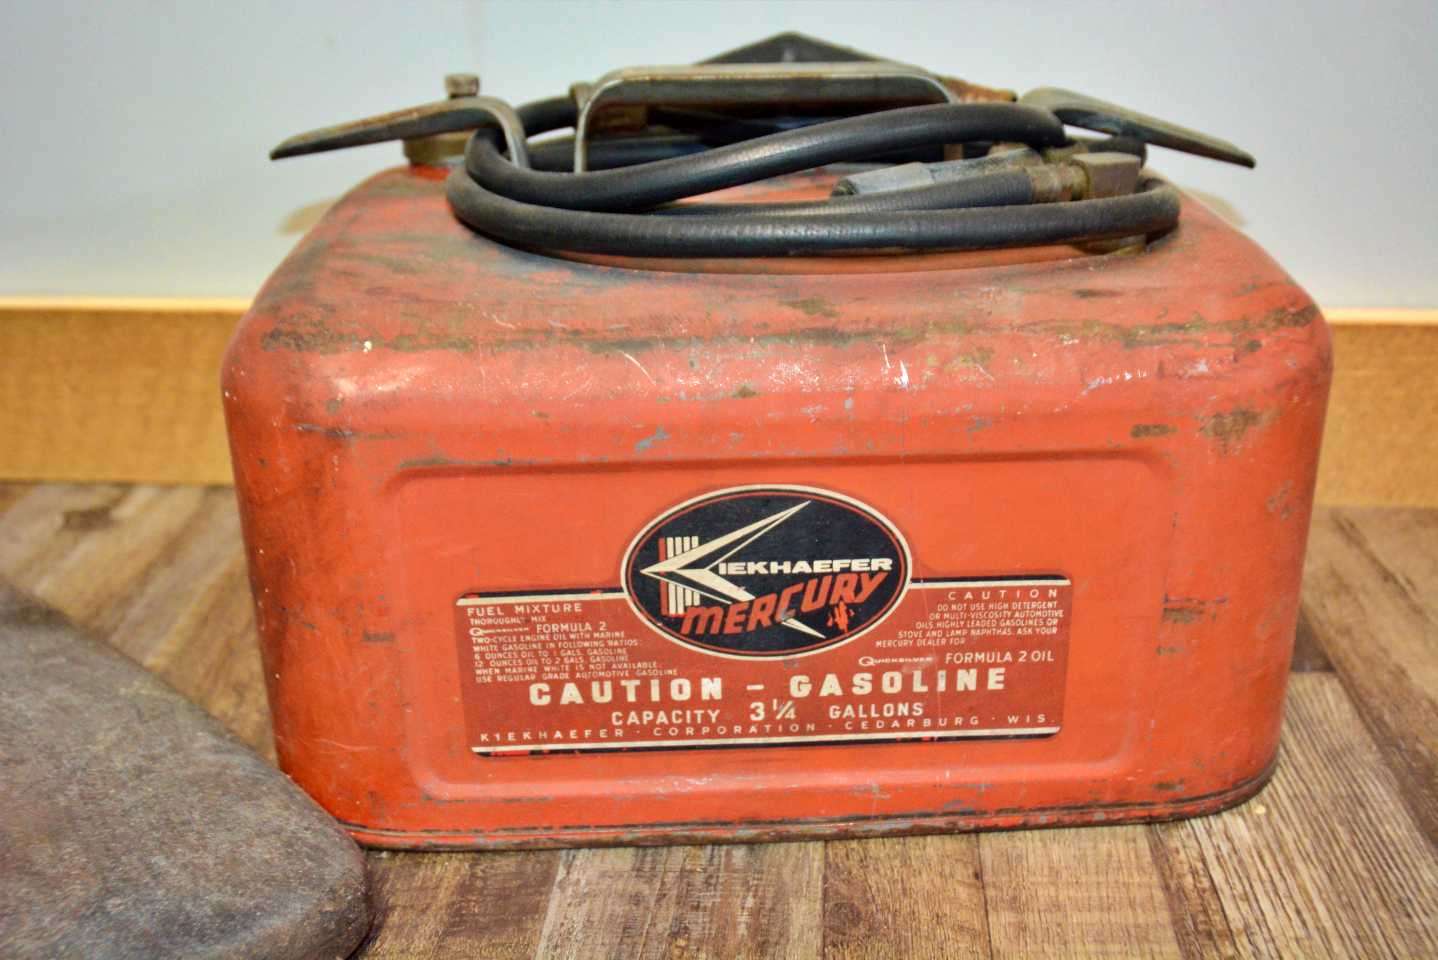 A mini-Mercury memorabilia museum is upstairs, beginning with this vintage Kiekhaefer 6-gallon fuel tank. Gross found it at an outdoor sale in Alabama. 